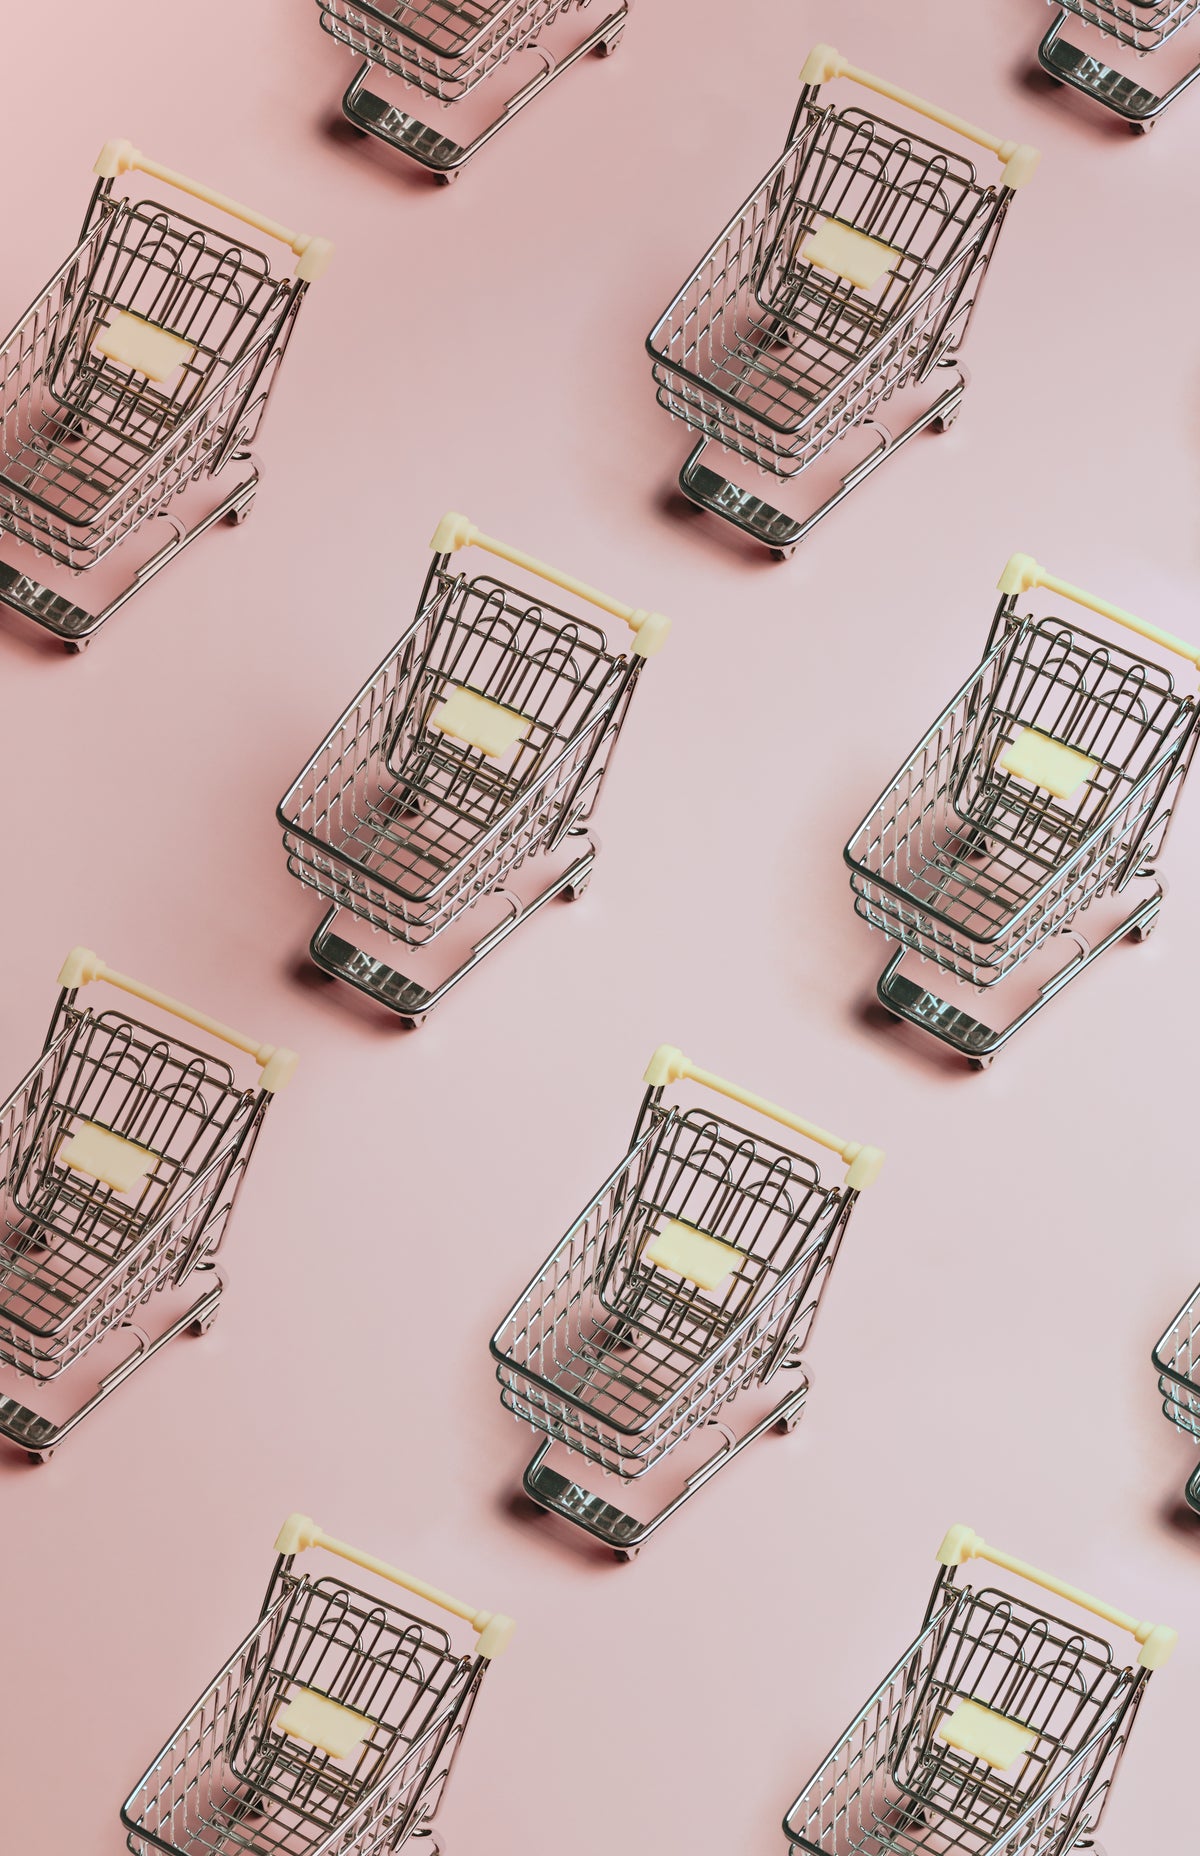 pattern of silver shopping carts on a pink background